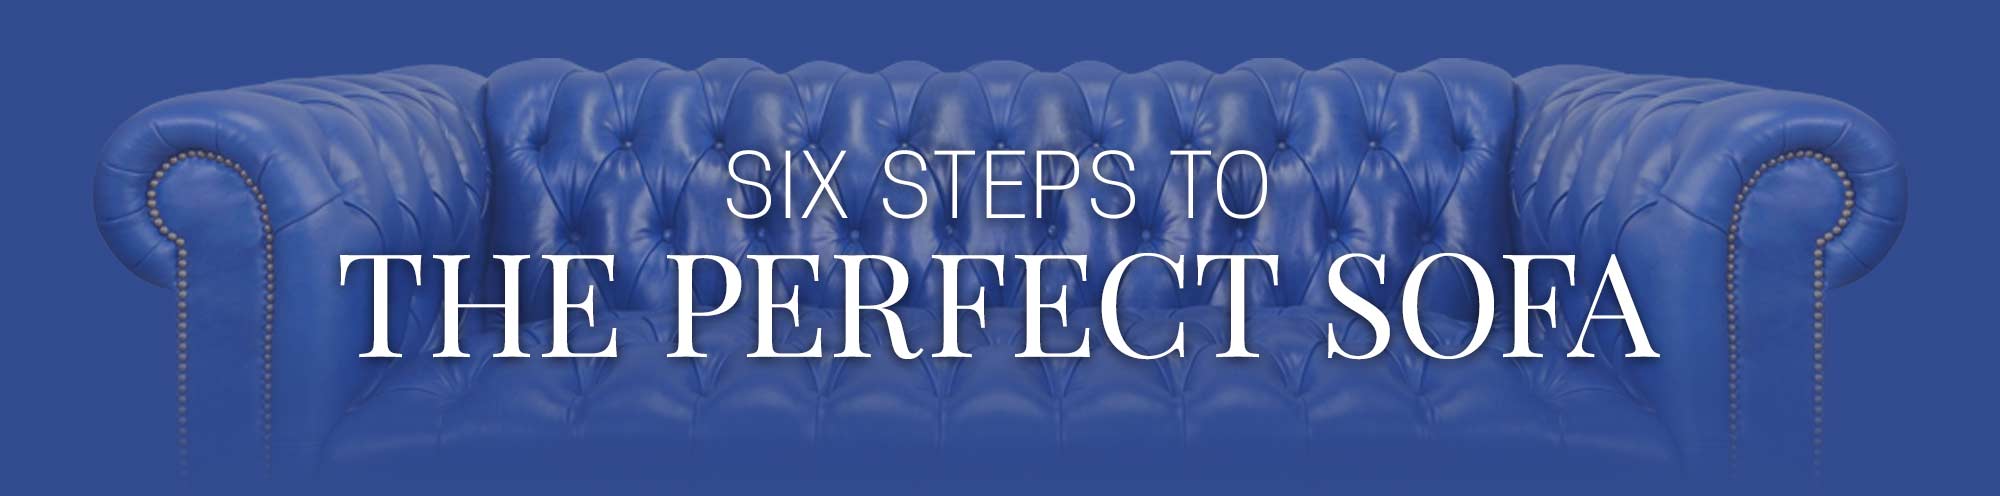 Six Steps To The Perfect Sofa